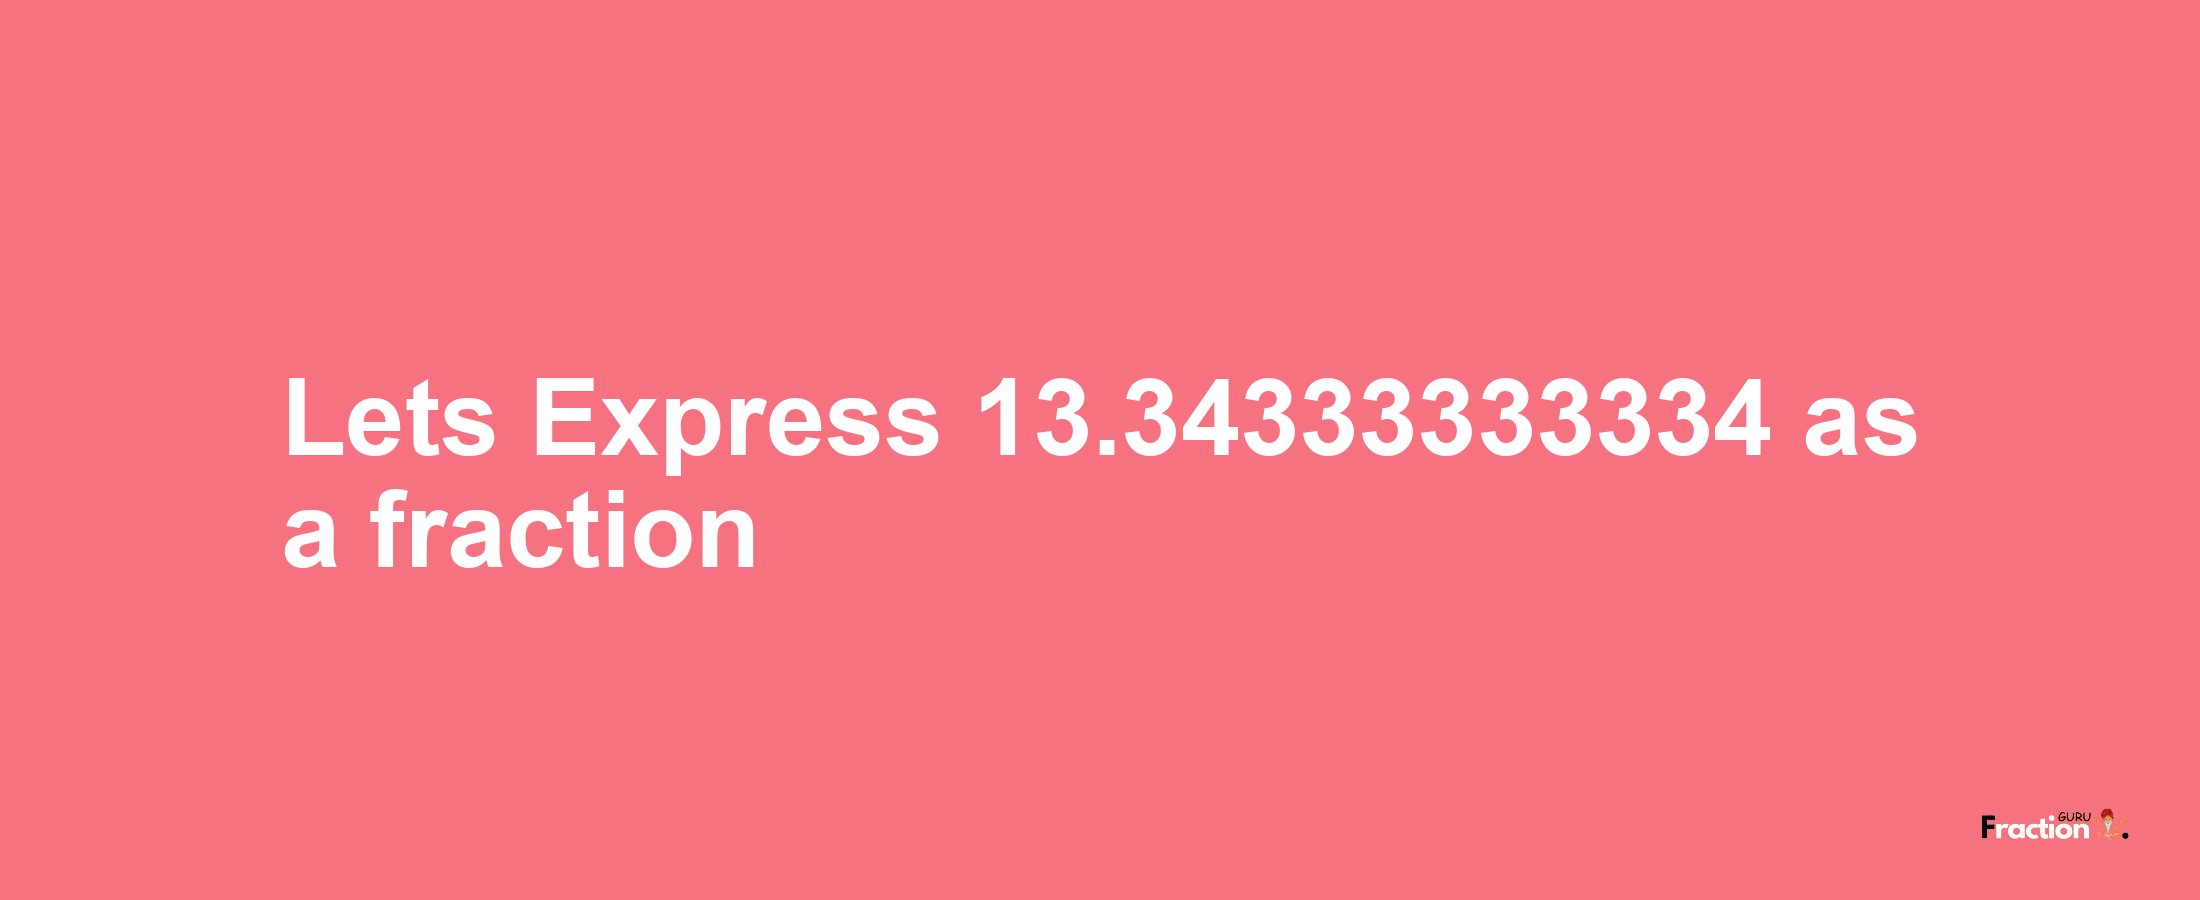 Lets Express 13.34333333334 as afraction